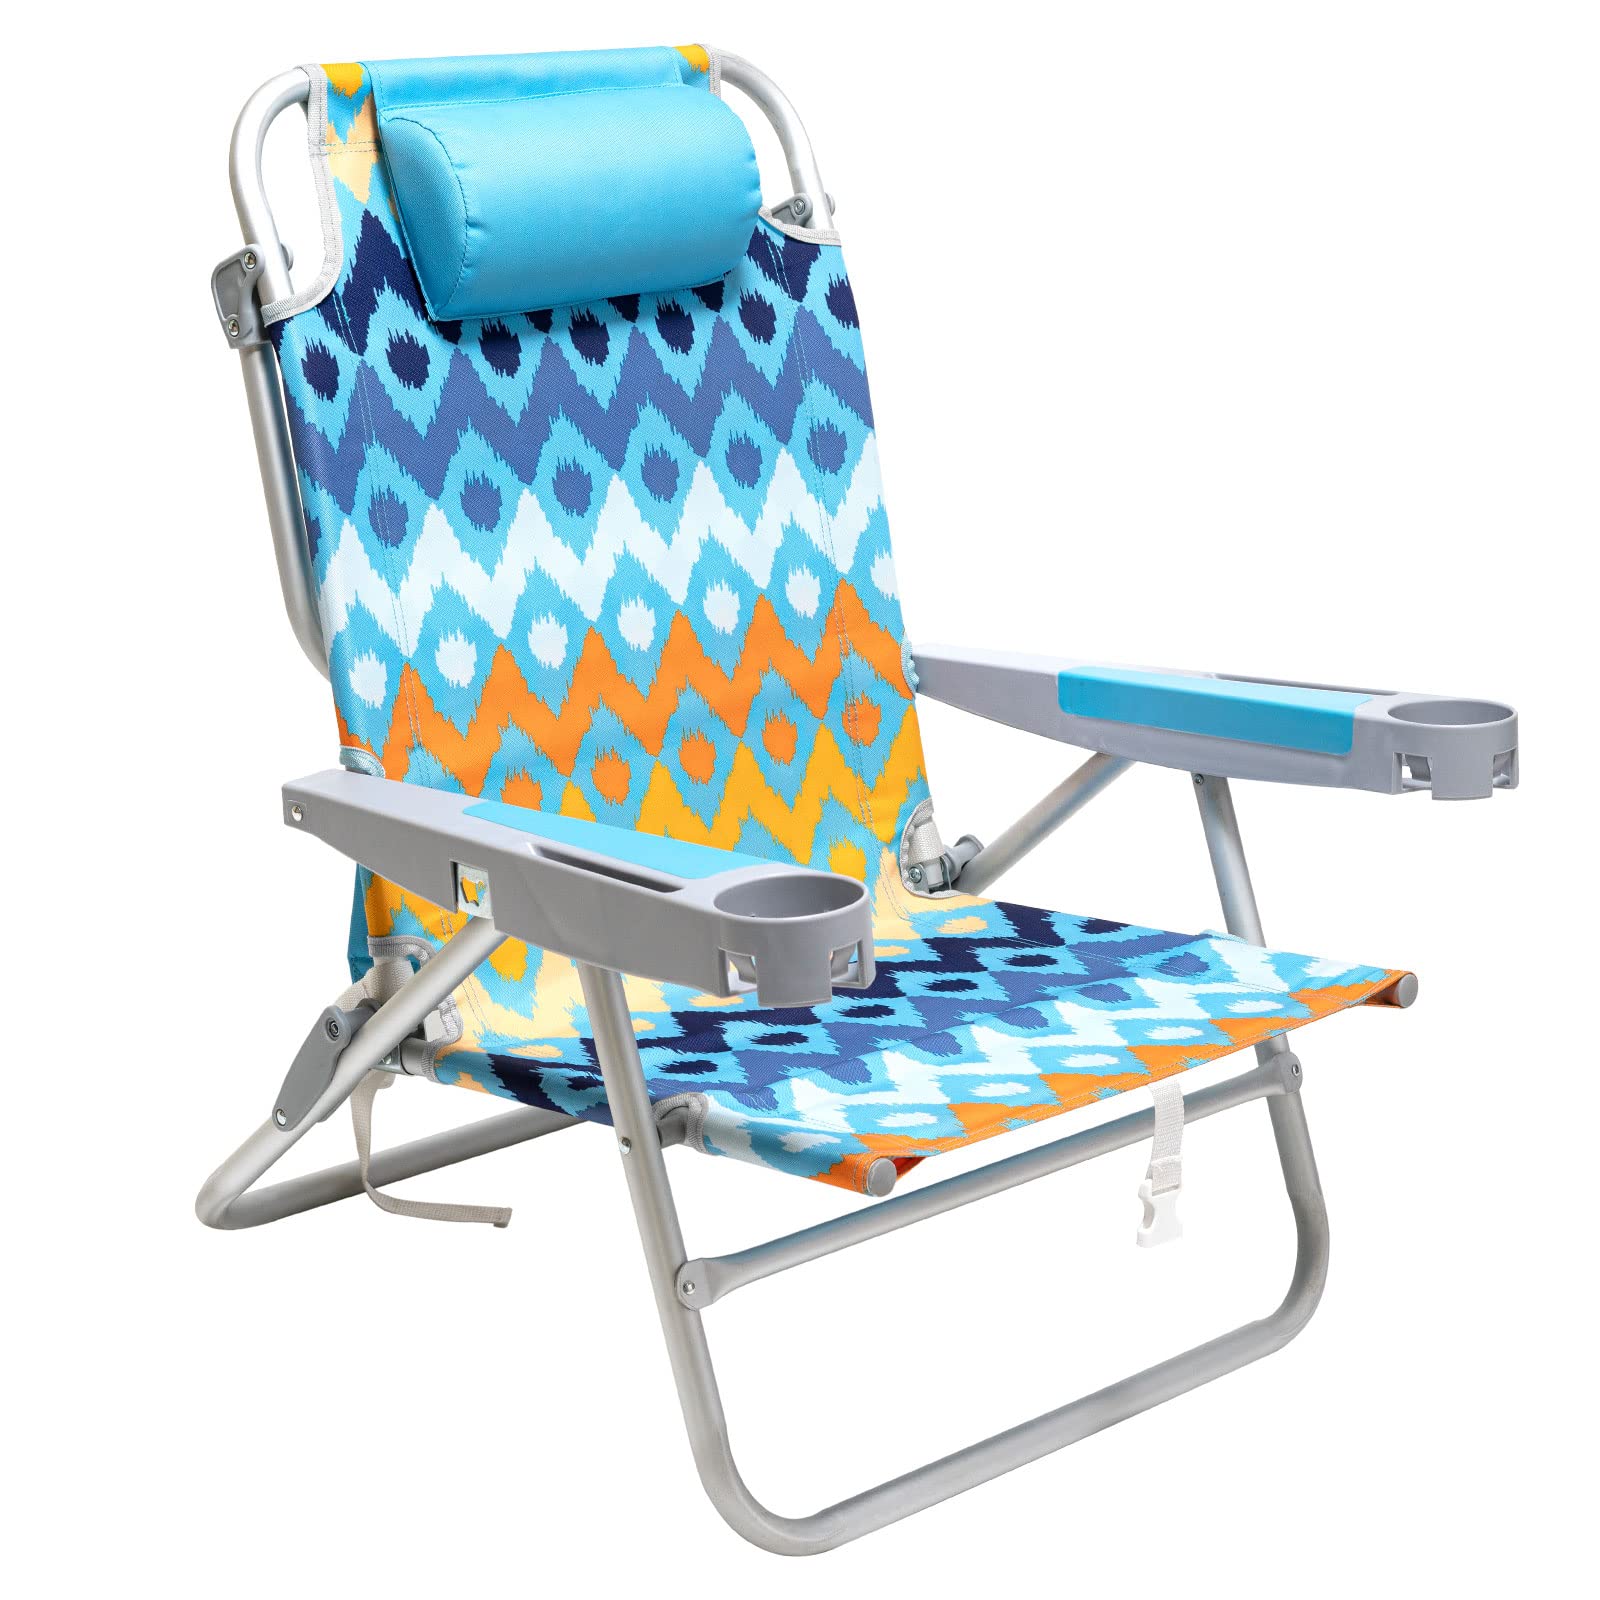 SUNNYFEEL Extra Wide 28" Low Beach Chair 5 Position Lay Flat, XL Oversized Portable Folding Sand Chairs with Cup Holder for Outd